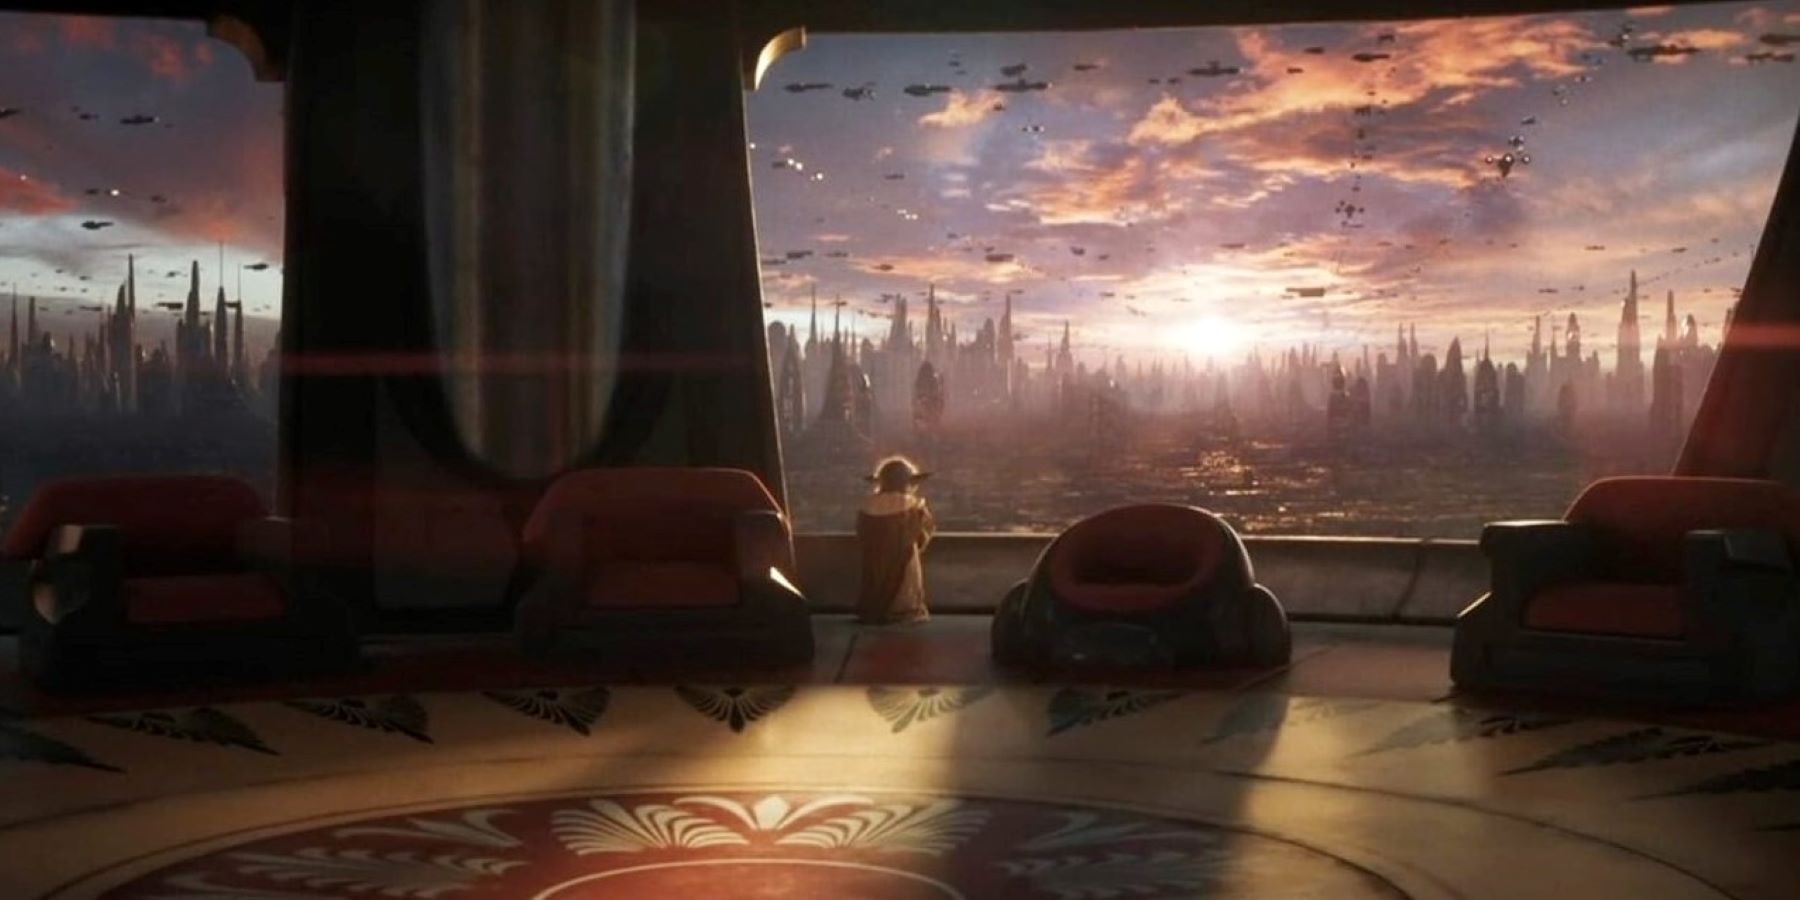 Star Wars Eclipse concept art showing Yoda in the Jedi Council room looking out on Coruscant